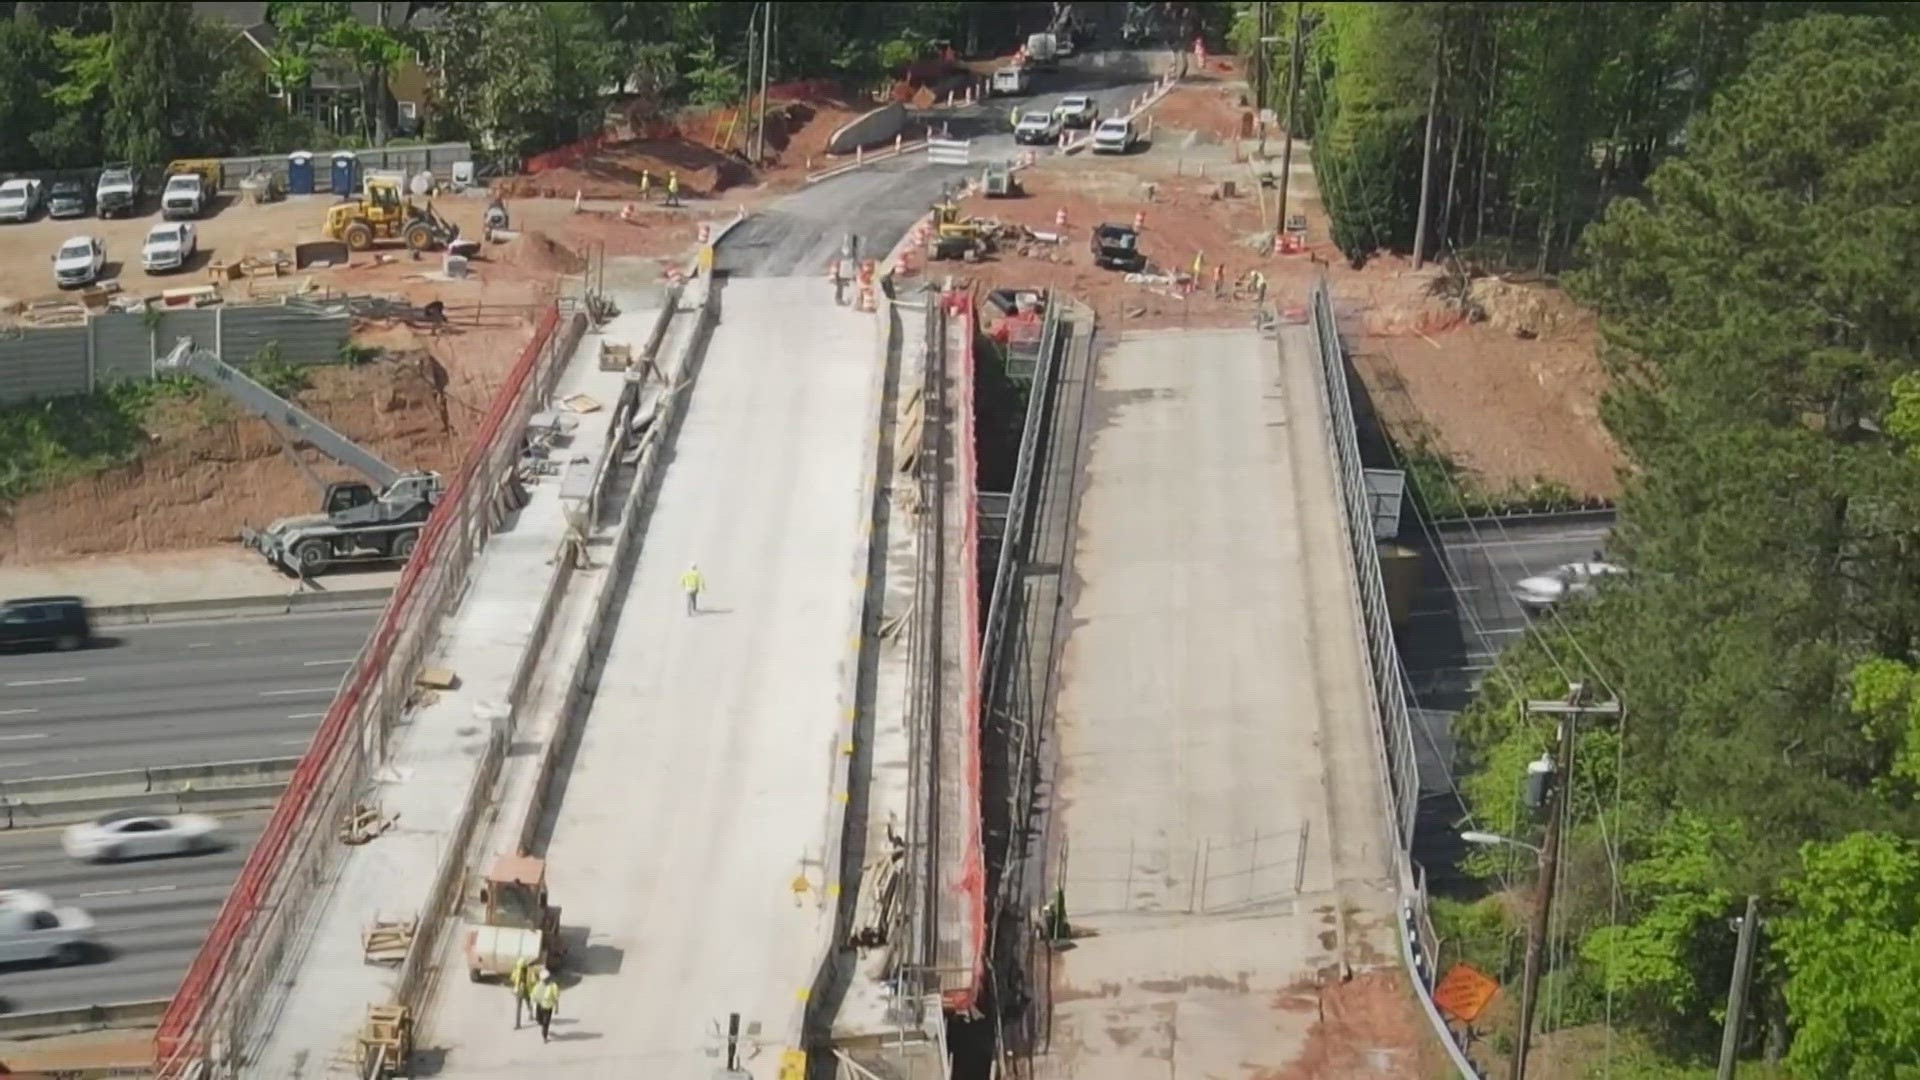 The old bridge handled roughly 19,000 trips, according to the Sandy Springs mayor.